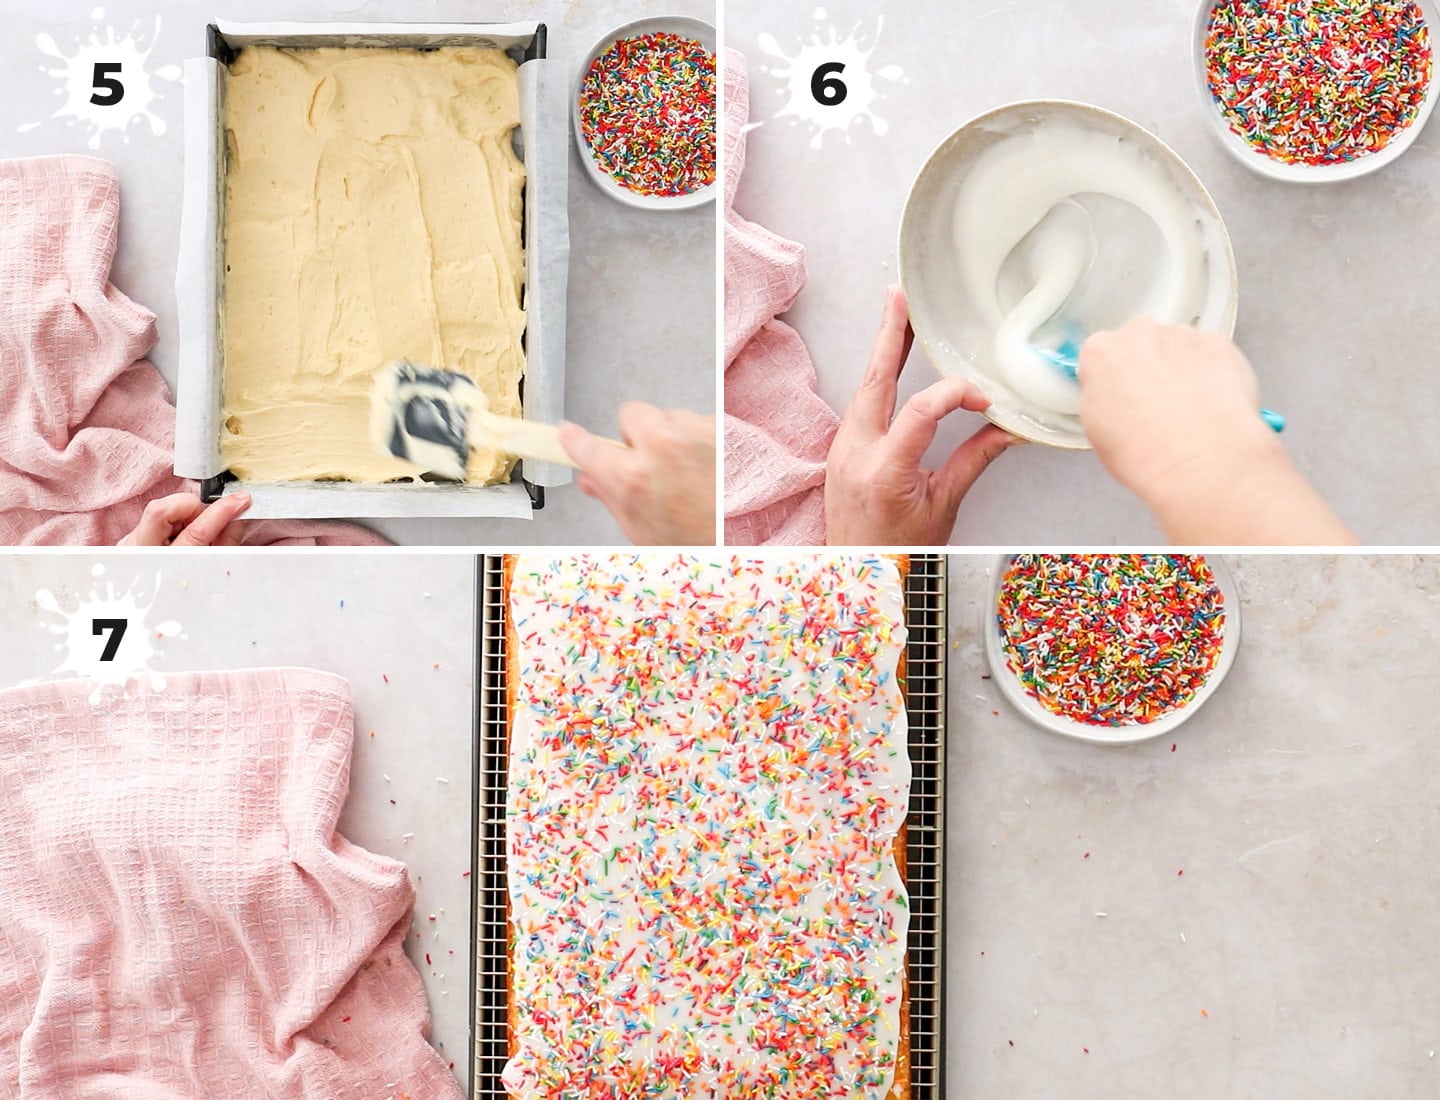 A collage of 3 images showing how to decorate the cake.